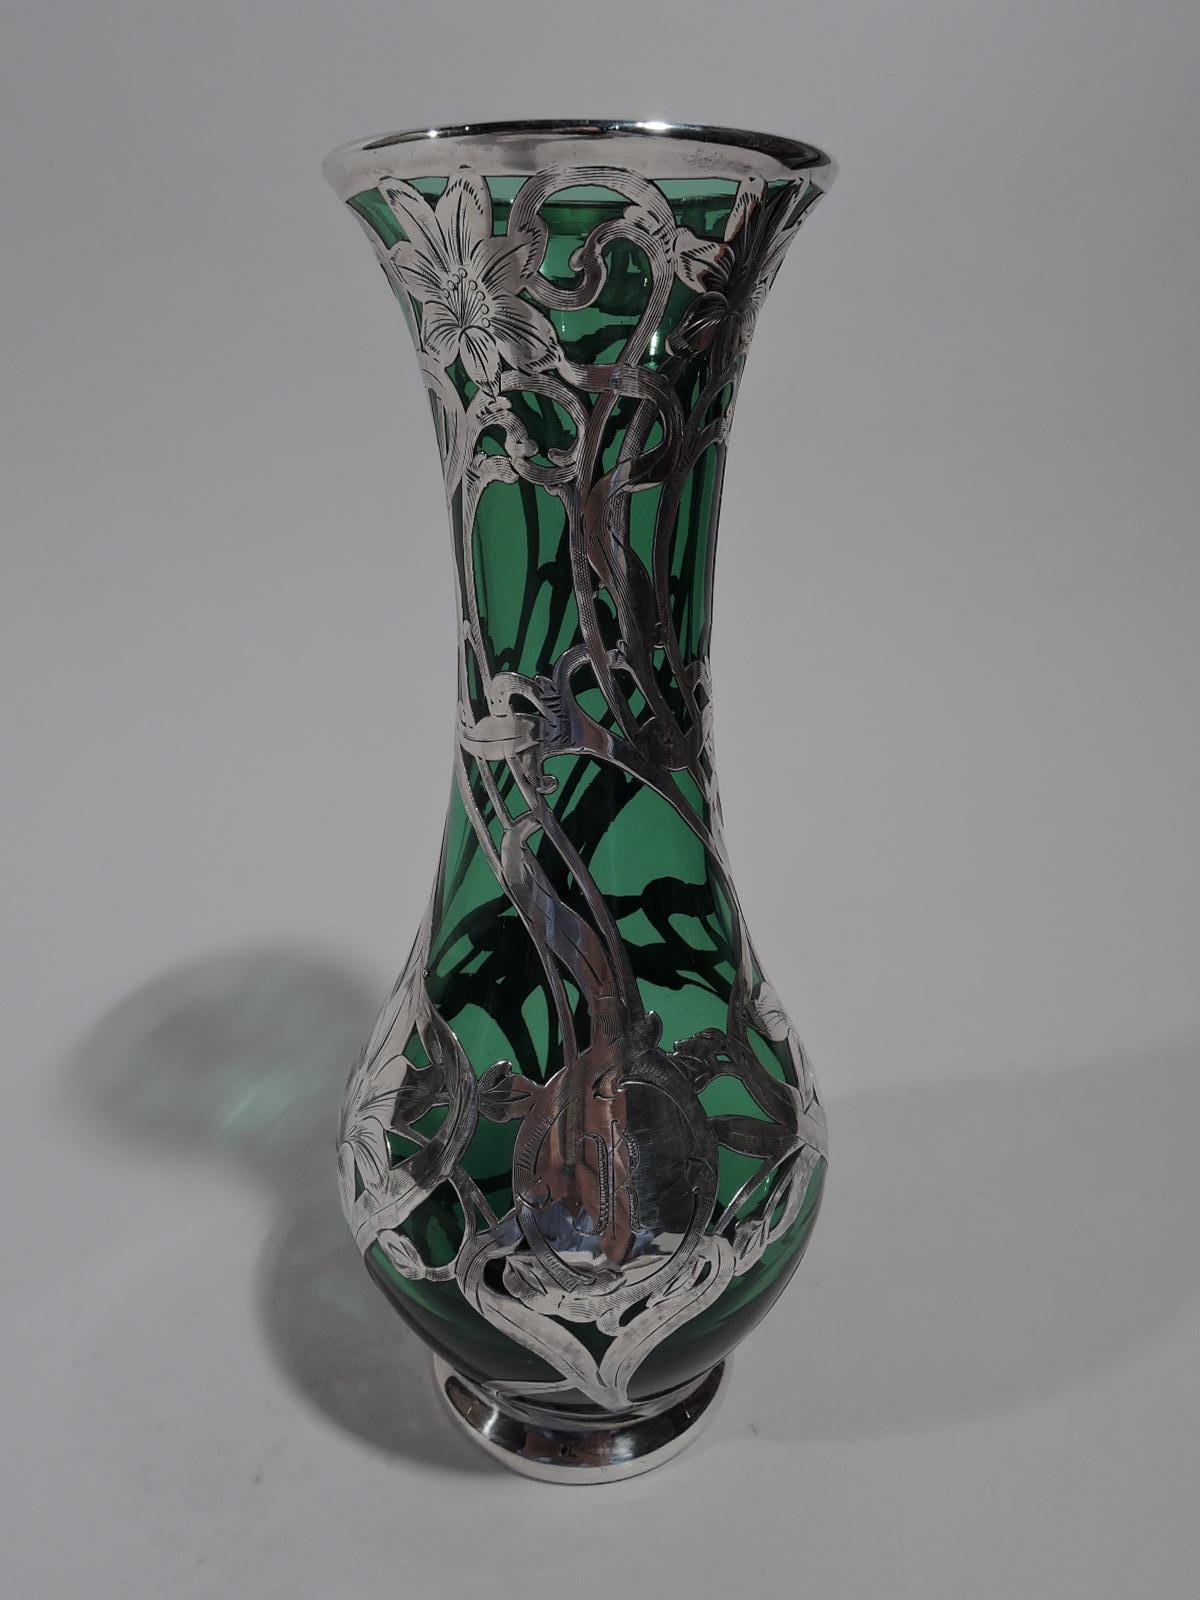 Turn-of-the-century Art Nouveau green glass vase with engraved silver overlay. Made by Alvin in Providence. Gentle baluster with flared rim and inset foot in silver collar. Climbing, twisting, and entwining stems and tendrils with blooms Scrolled